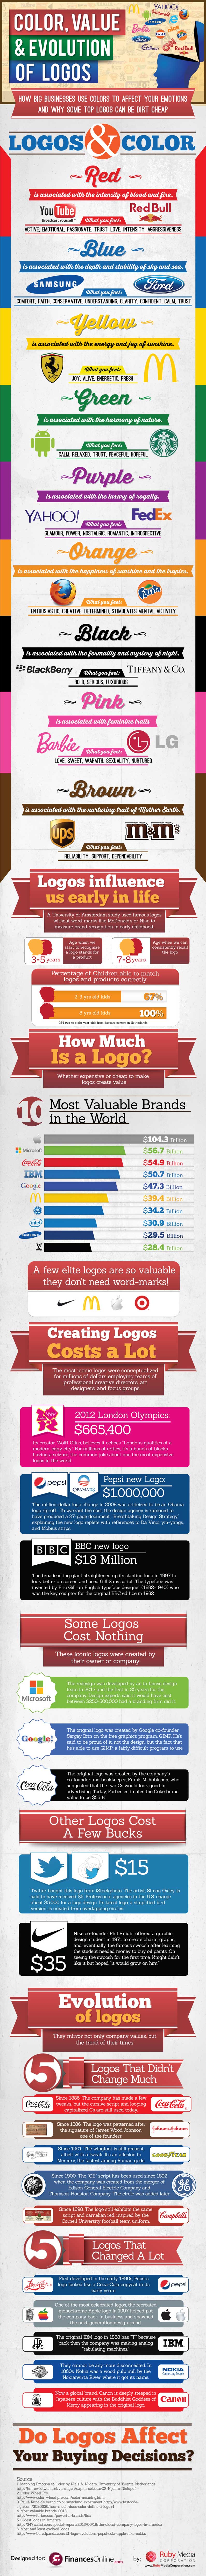 Logo color, value and evolution in infographic